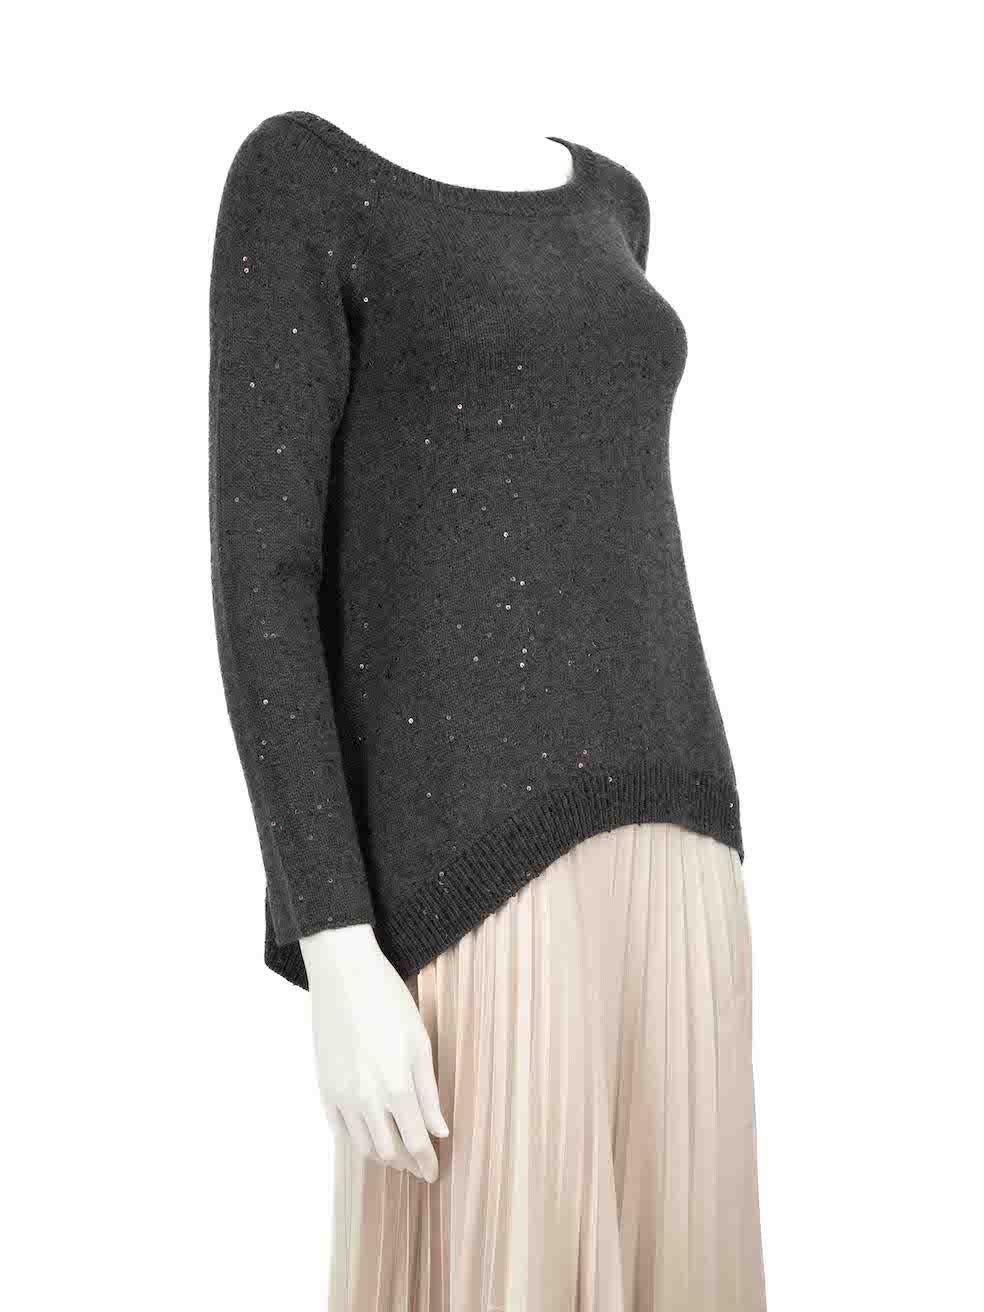 CONDITION is Very good. Hardly any visible wear to jumper is evident on this used Brunello Cucinelli designer resale item.
 
 
 
 Details
 
 
 Grey
 
 Cashmere
 
 Knit jumper
 
 Sequinned accent
 
 Long sleeves
 
 Round neck
 
 
 
 
 
 Made in